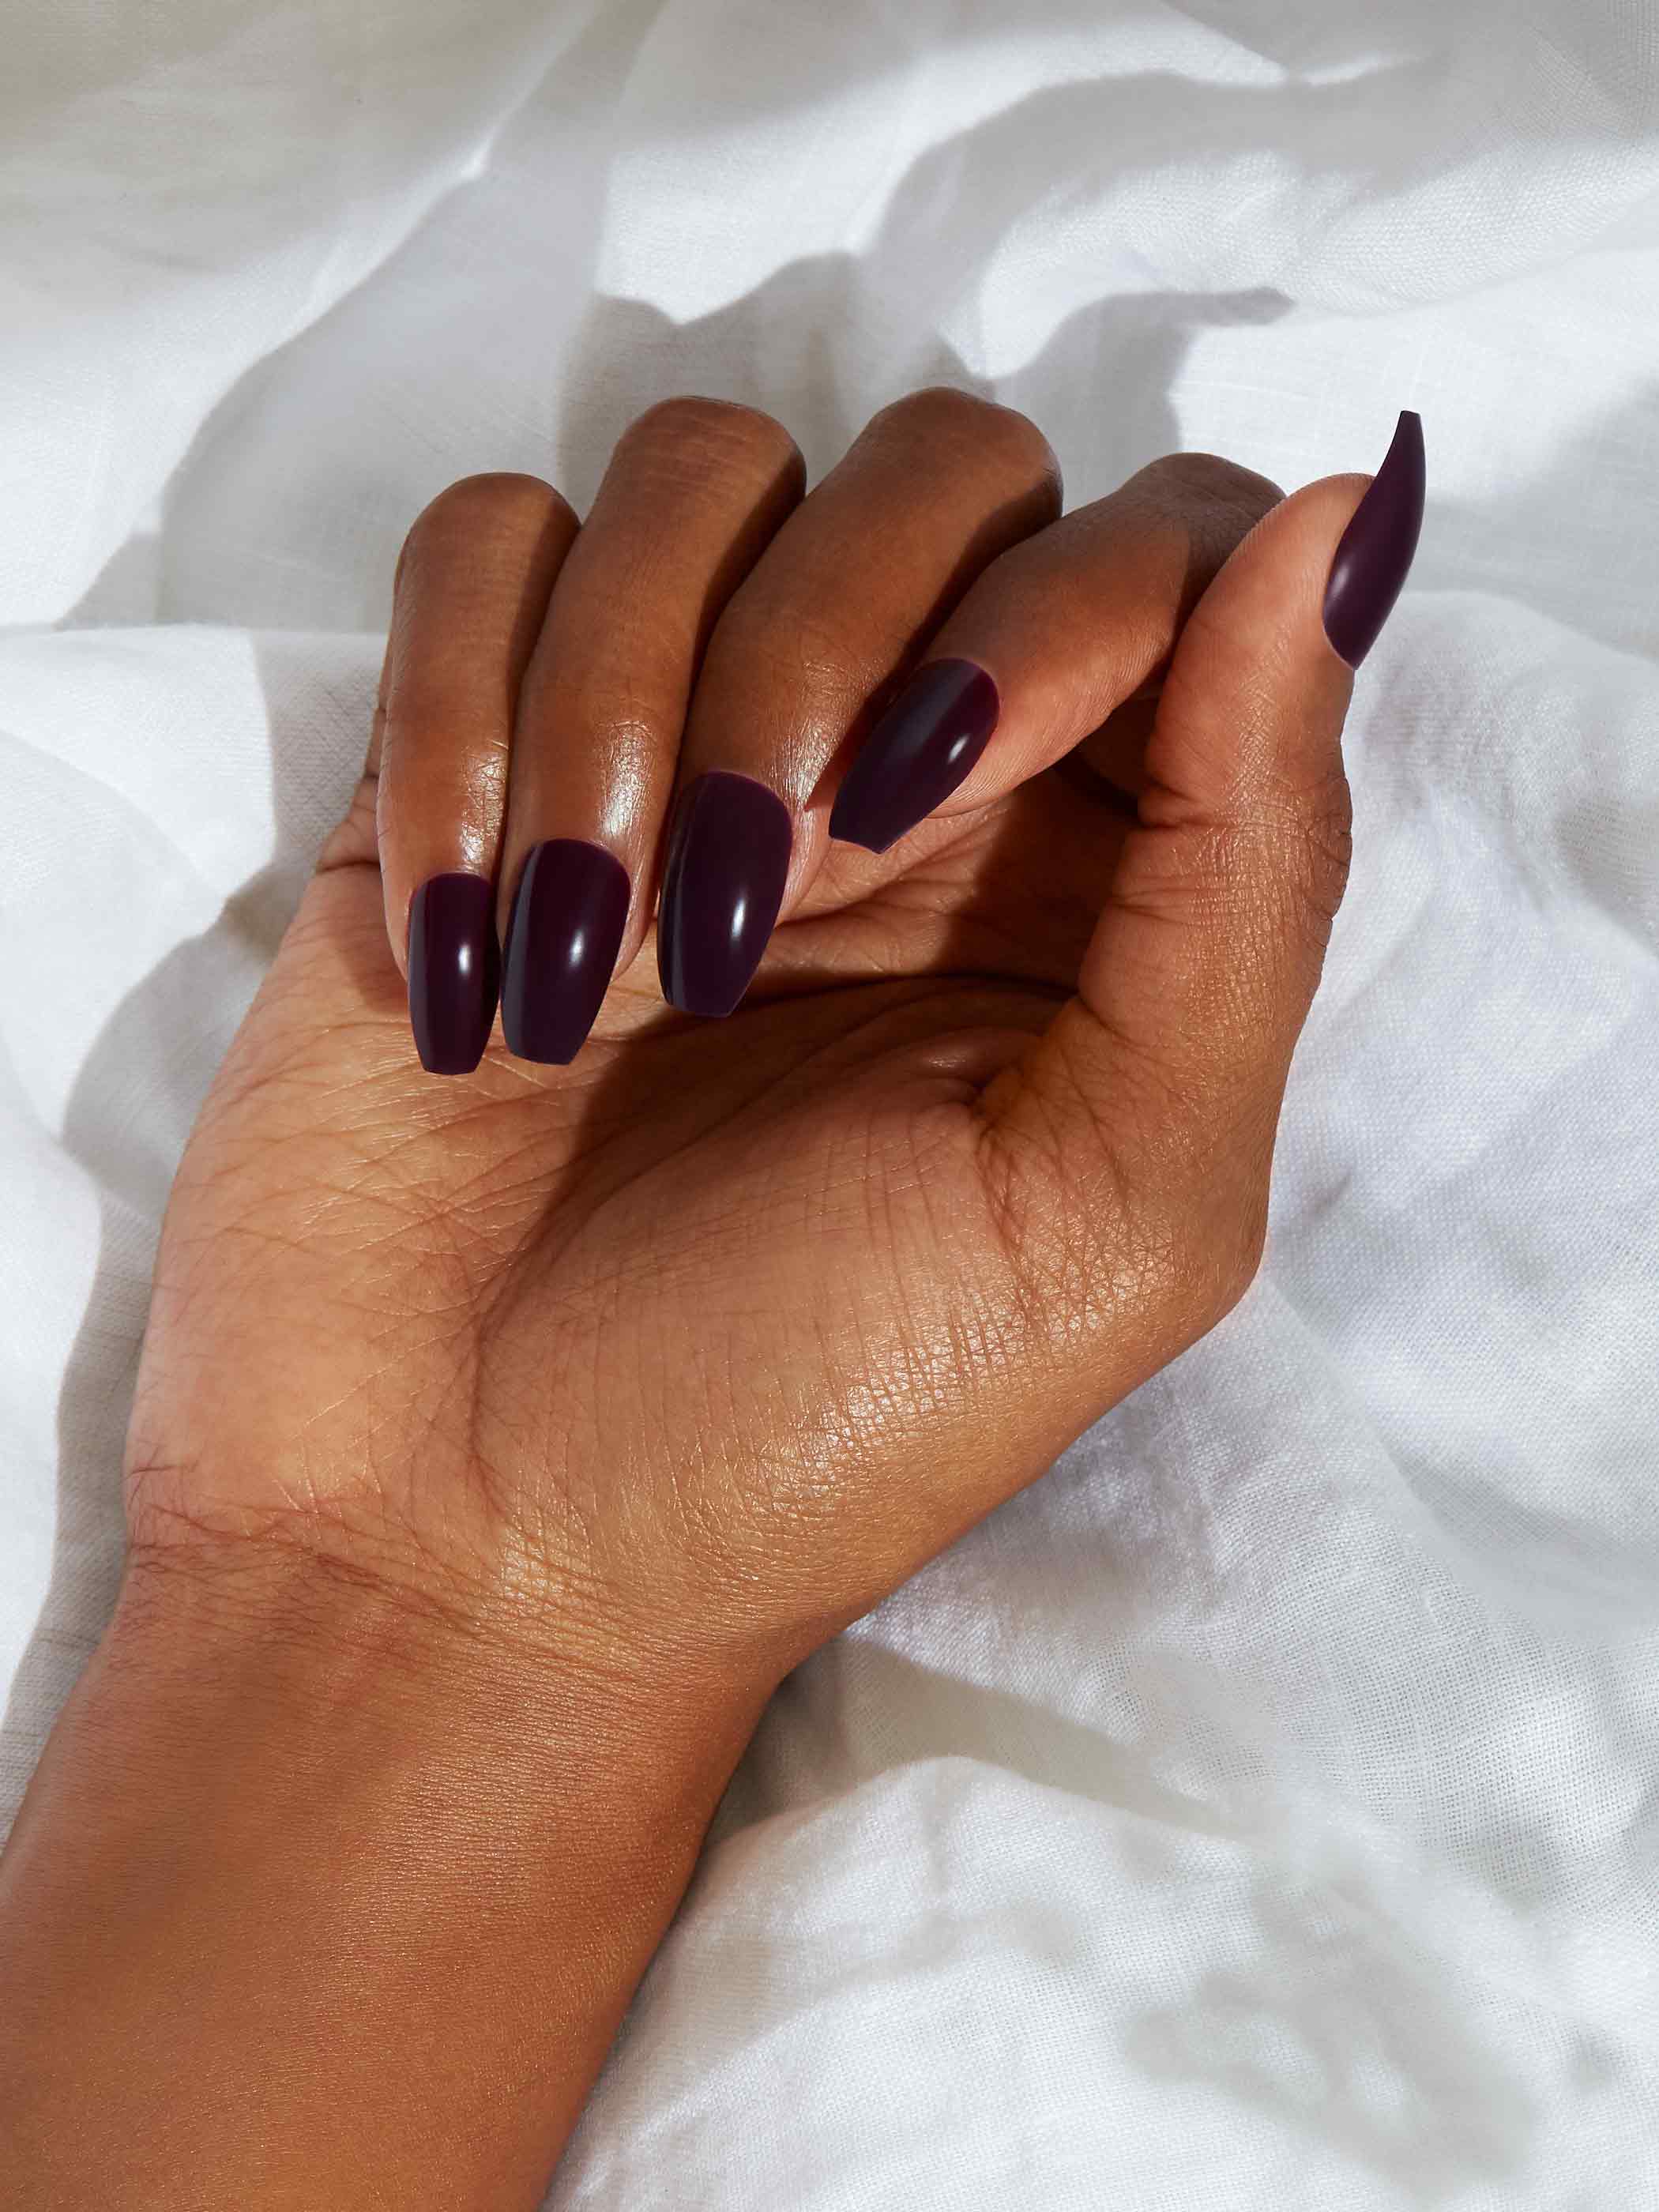 50 Gorgeous Nail Colors for Dark Skin That Play Up Your Melanin